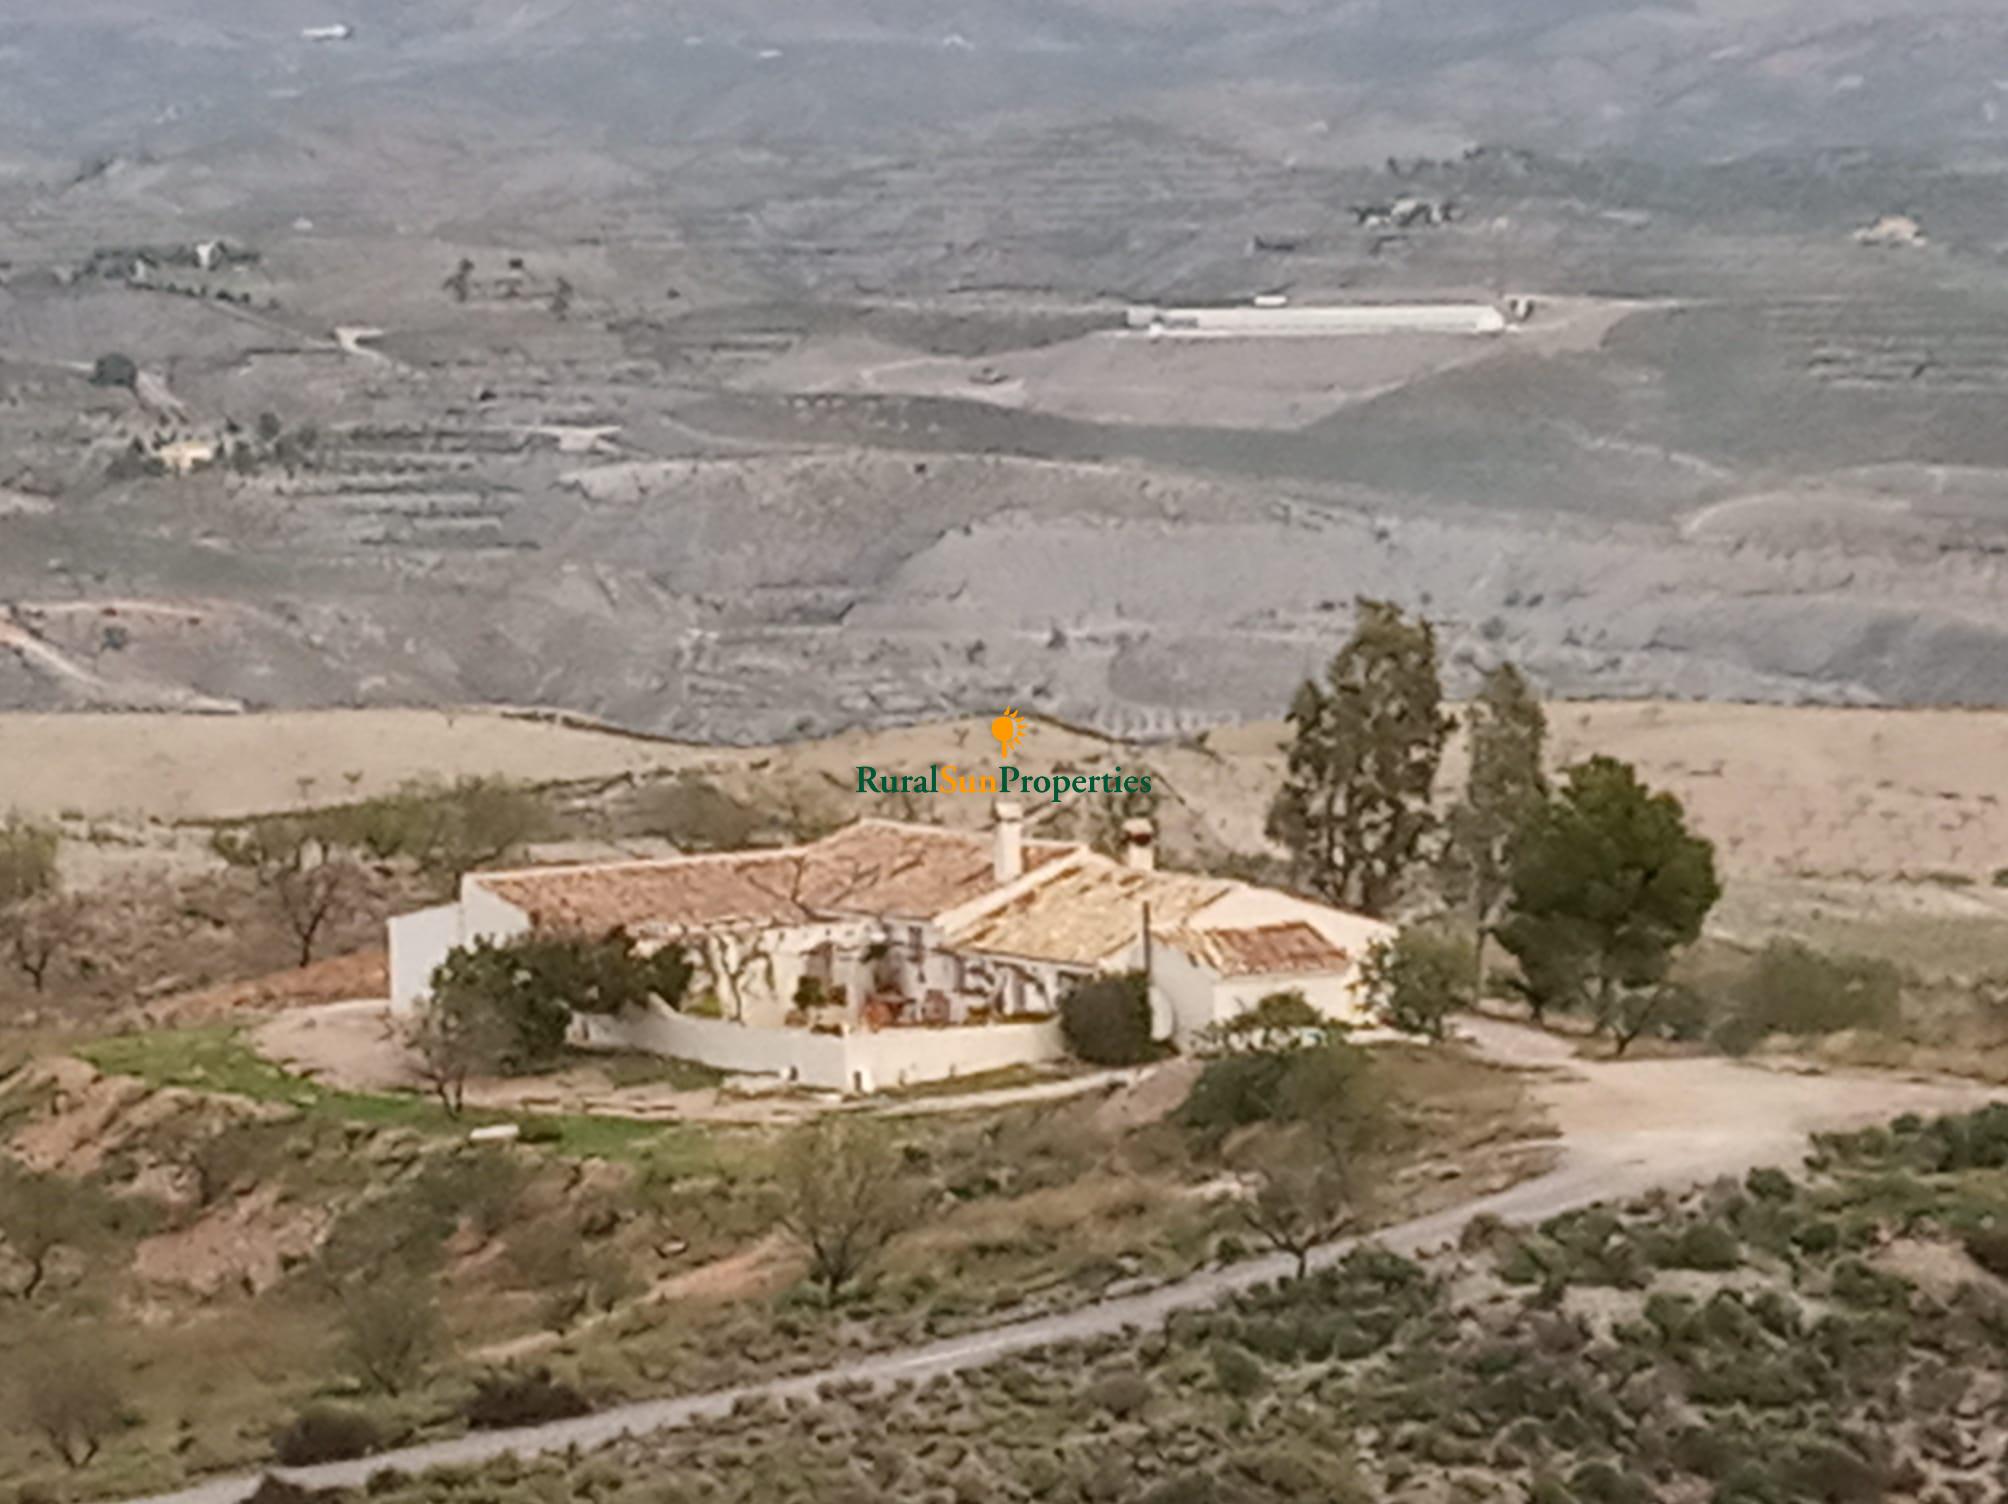 SOLD. Murcia-Almeria Cortijo Rustic style country house on a plot of 53.000m2